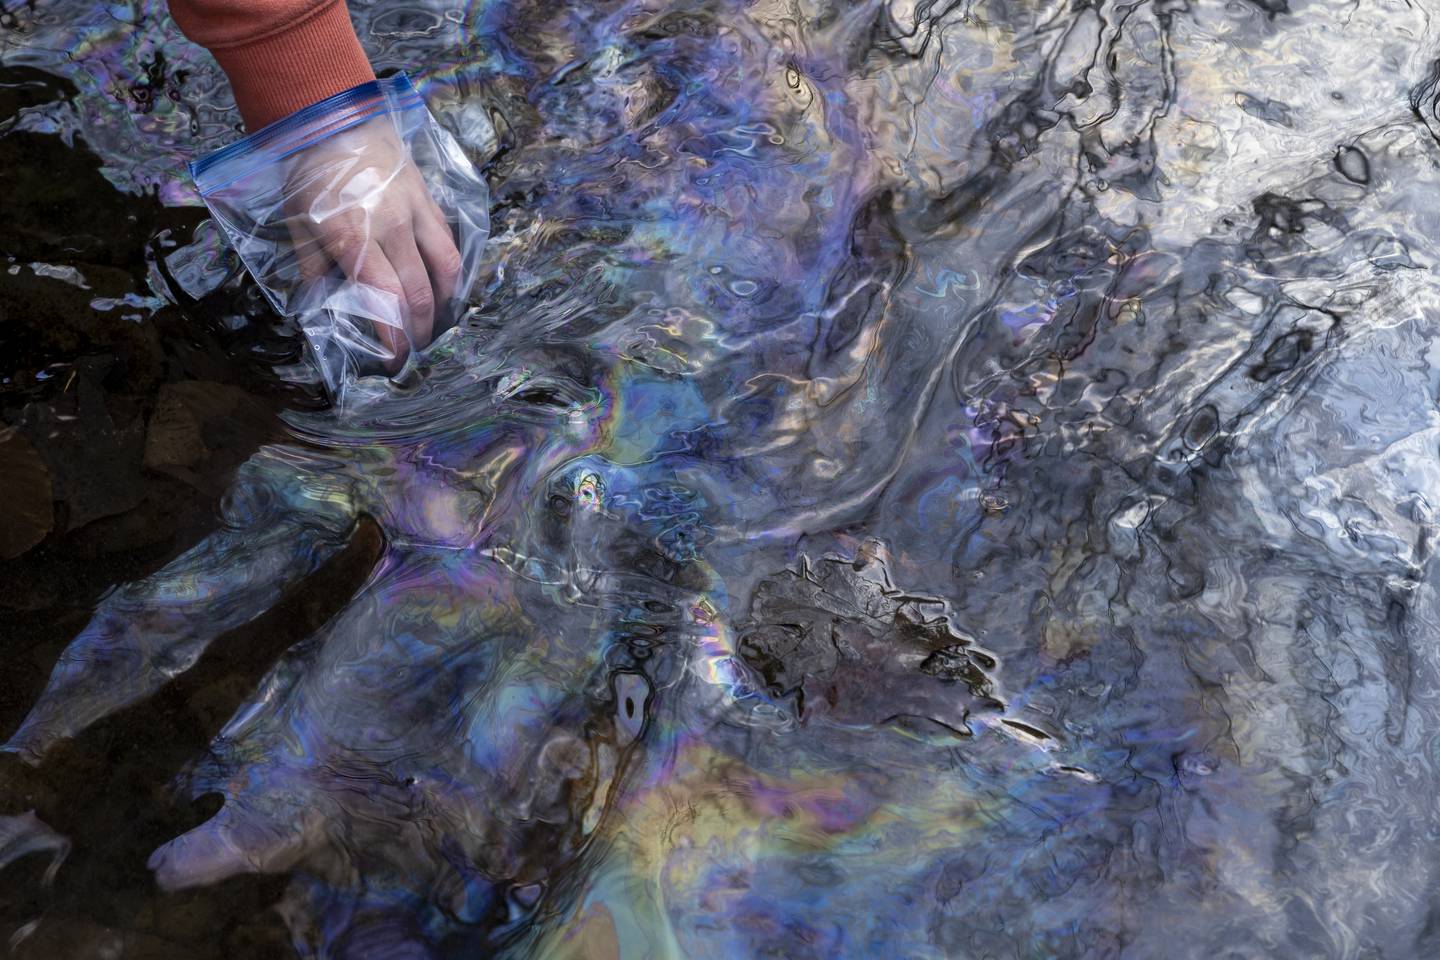 A hand covered in a plastic bag reaches into water with an oily sheen on the surface.